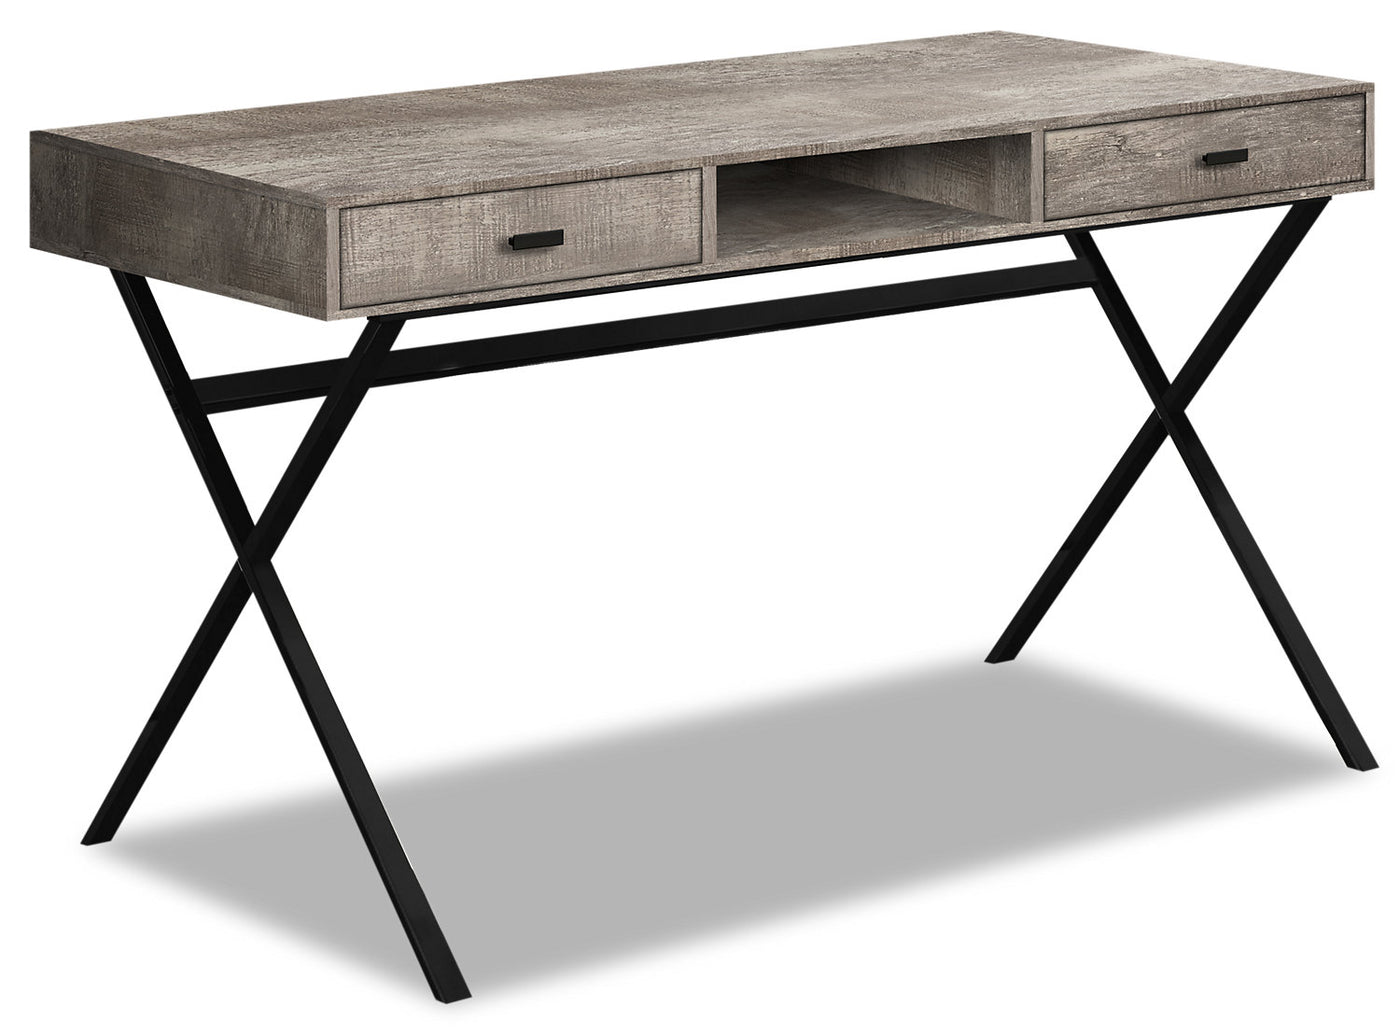 Flynn Reclaimed Wood Look Desk Taupe The Brick